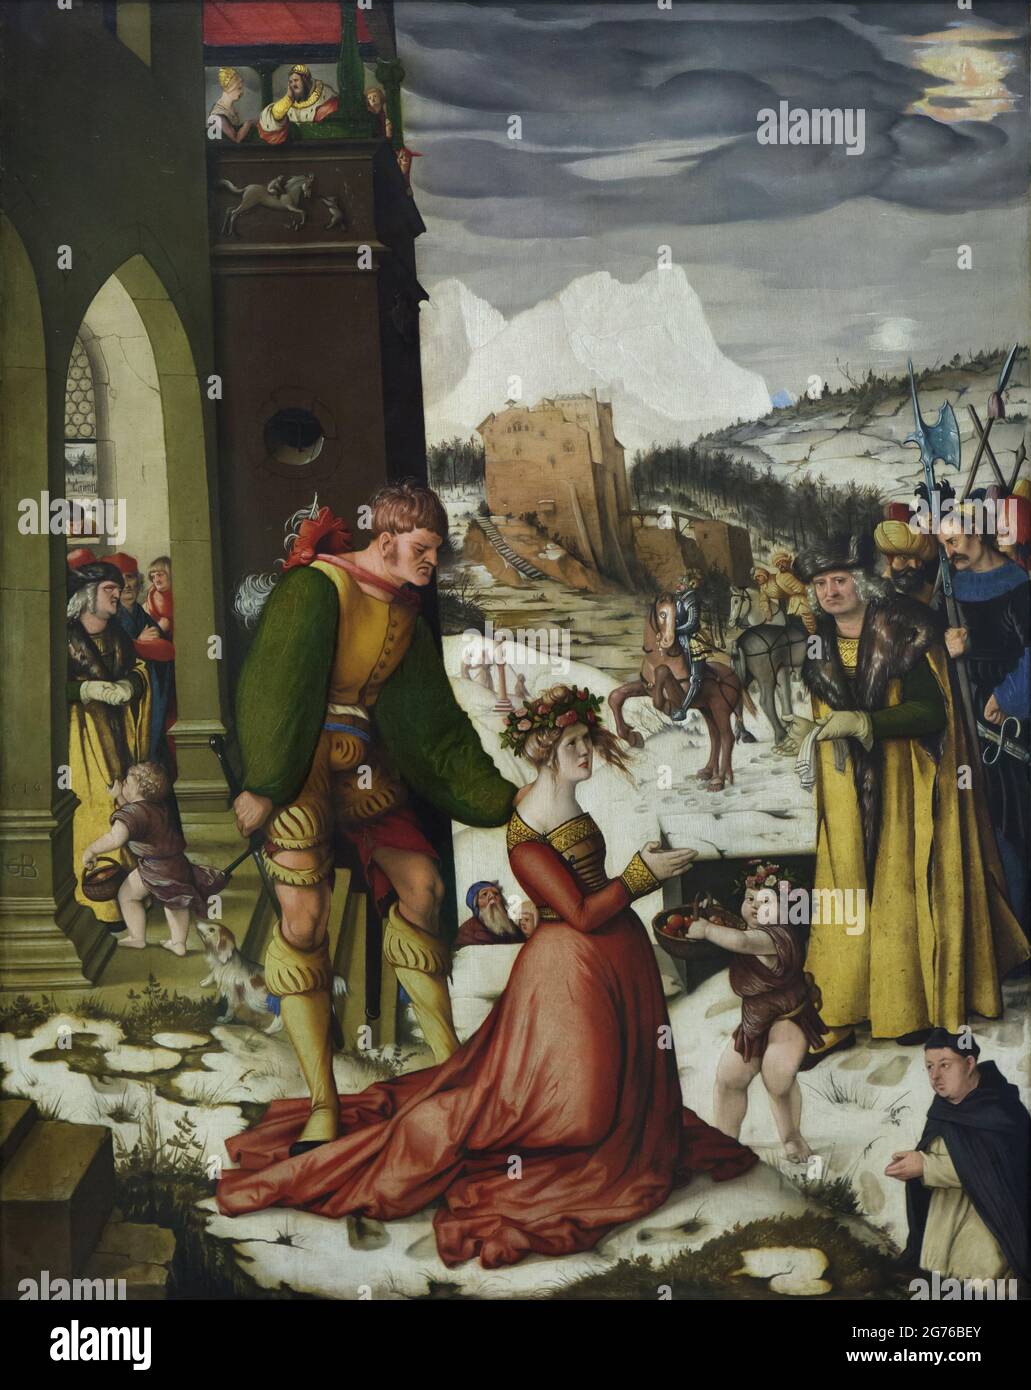 Painting 'Beheading of Saint Dorothy' by German Renaissance painter Hans Baldung Grien (1516) on display at the permanent exhibition of old masters of the National Gallery (Národní galerie) in Sternberg Palace (Šternberský palác) in Prague, Czech Republic. Stock Photo